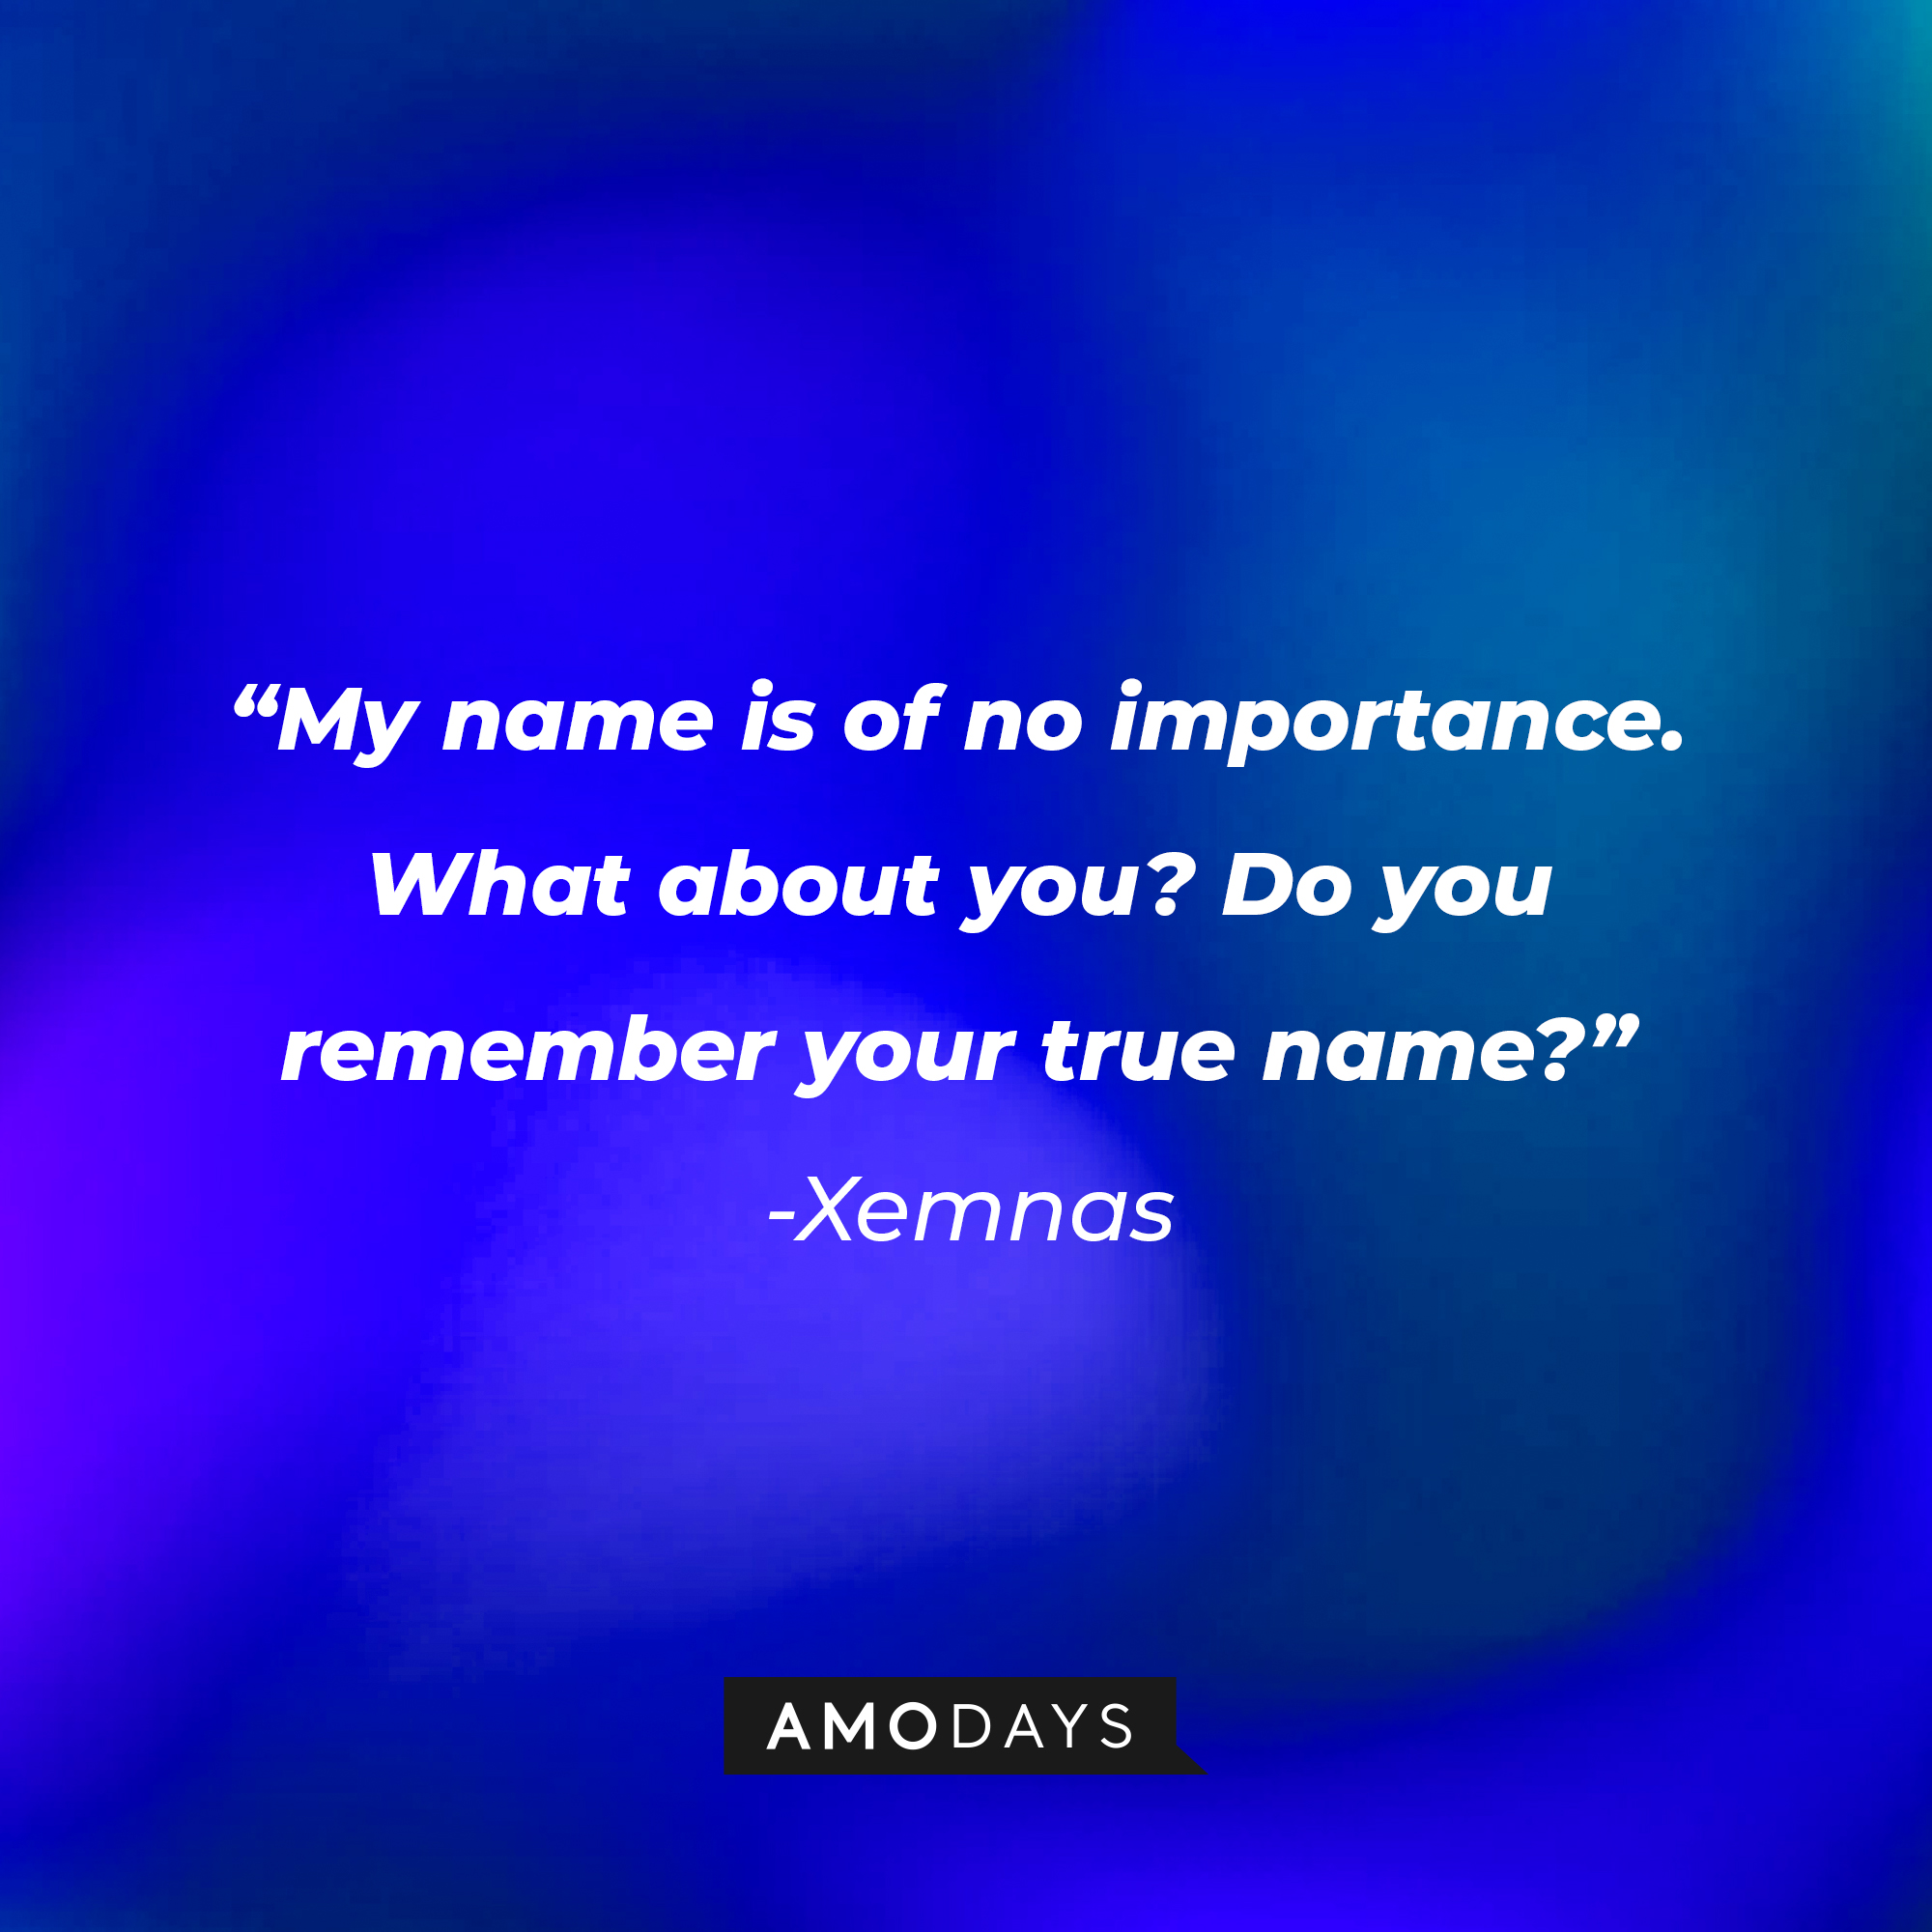 Xenmas’ quote: My name is of no importance. What about you? Do you remember your true name? | Source: AmoDays